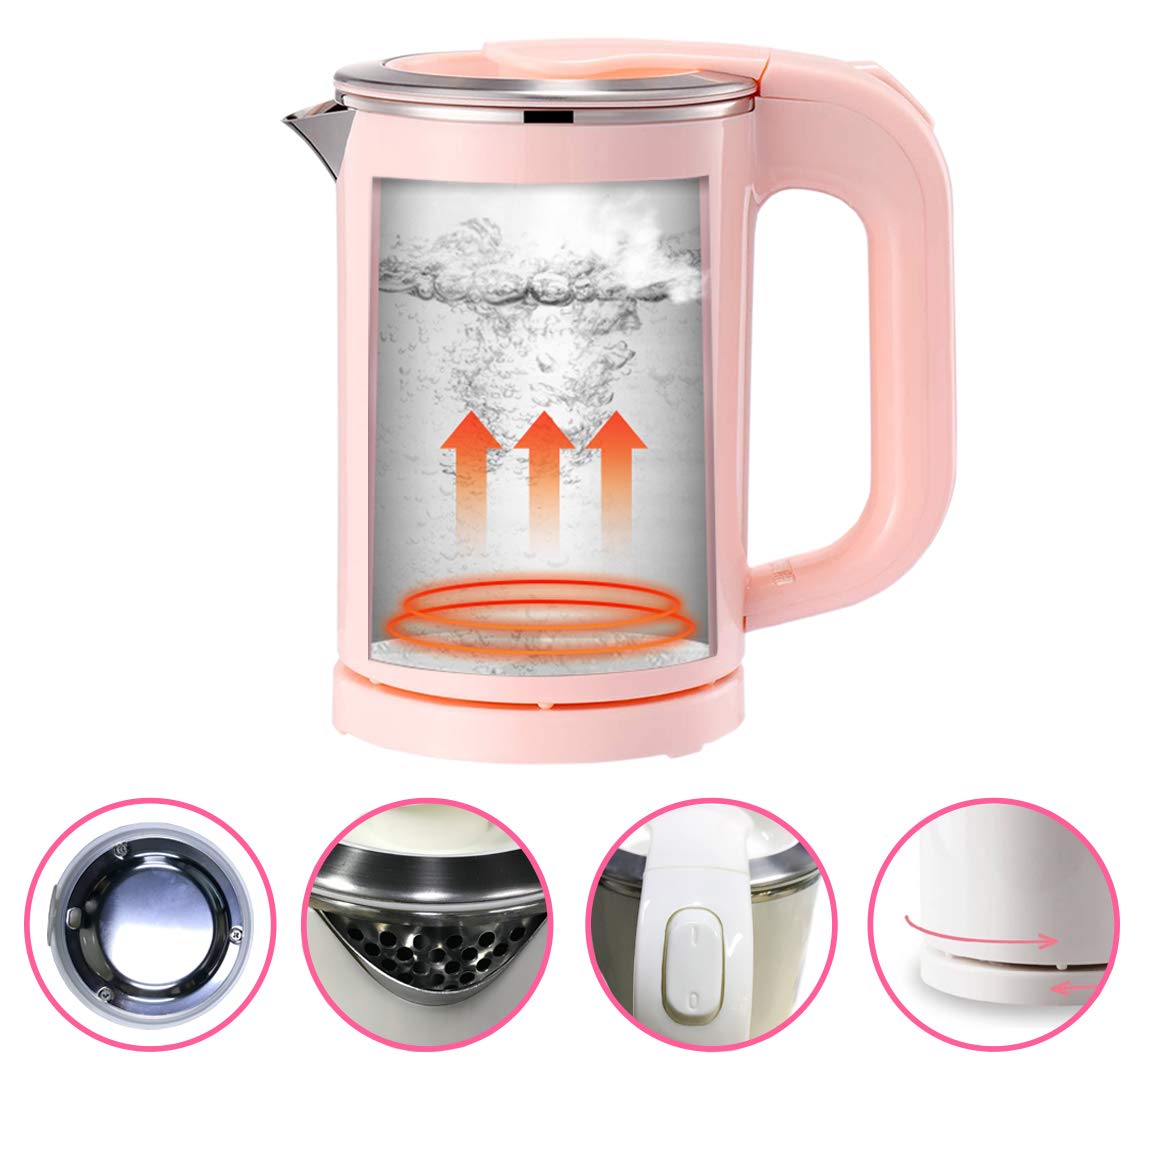 EAMATE 0.5L Portable Travel Electric Kettle Suitable For Traveling Cooking, Boiling (Pink)